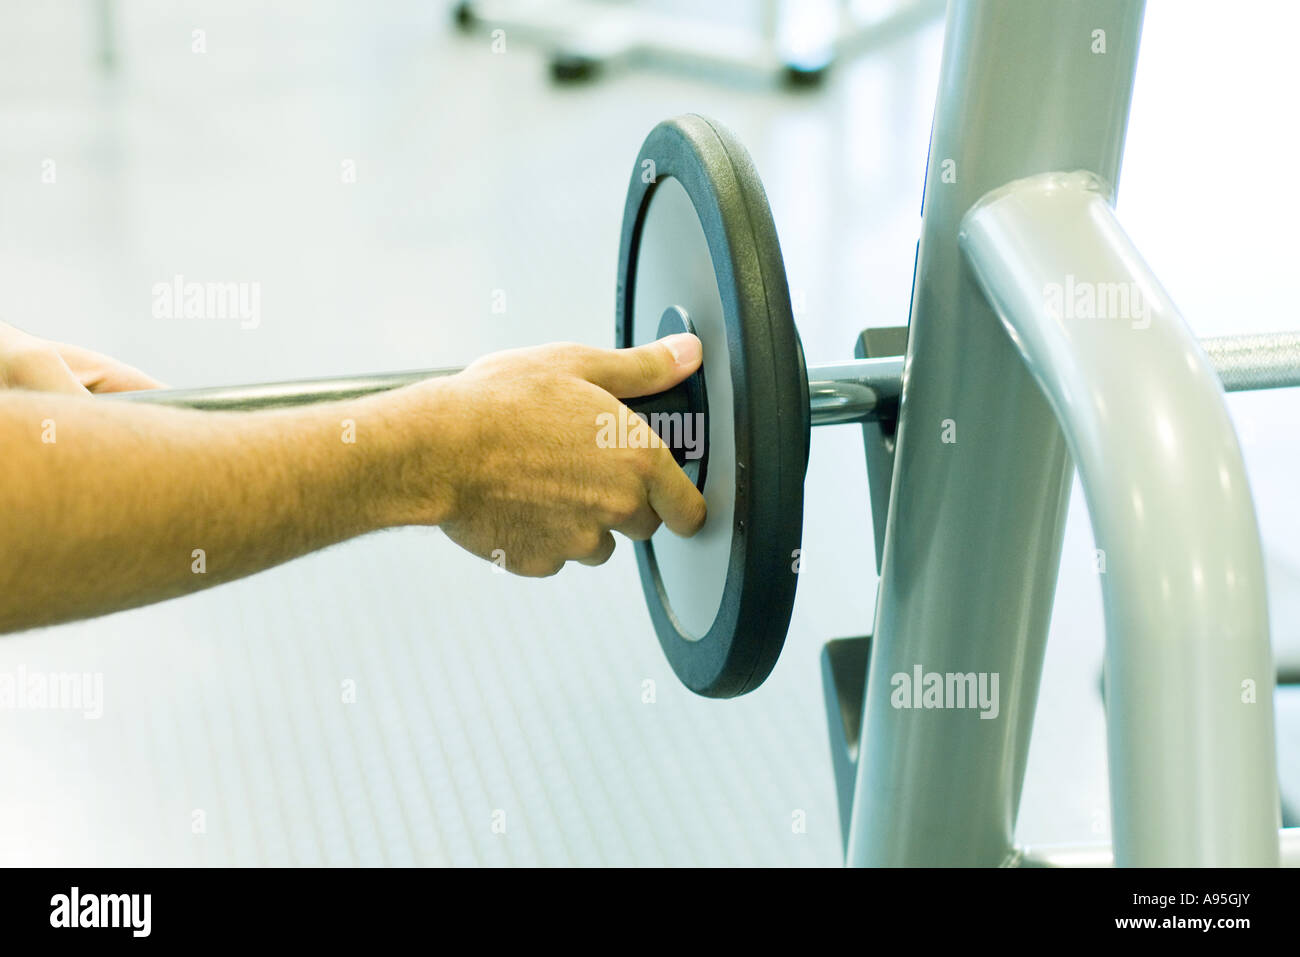 Man adjusting weight on barbell Stock Photo